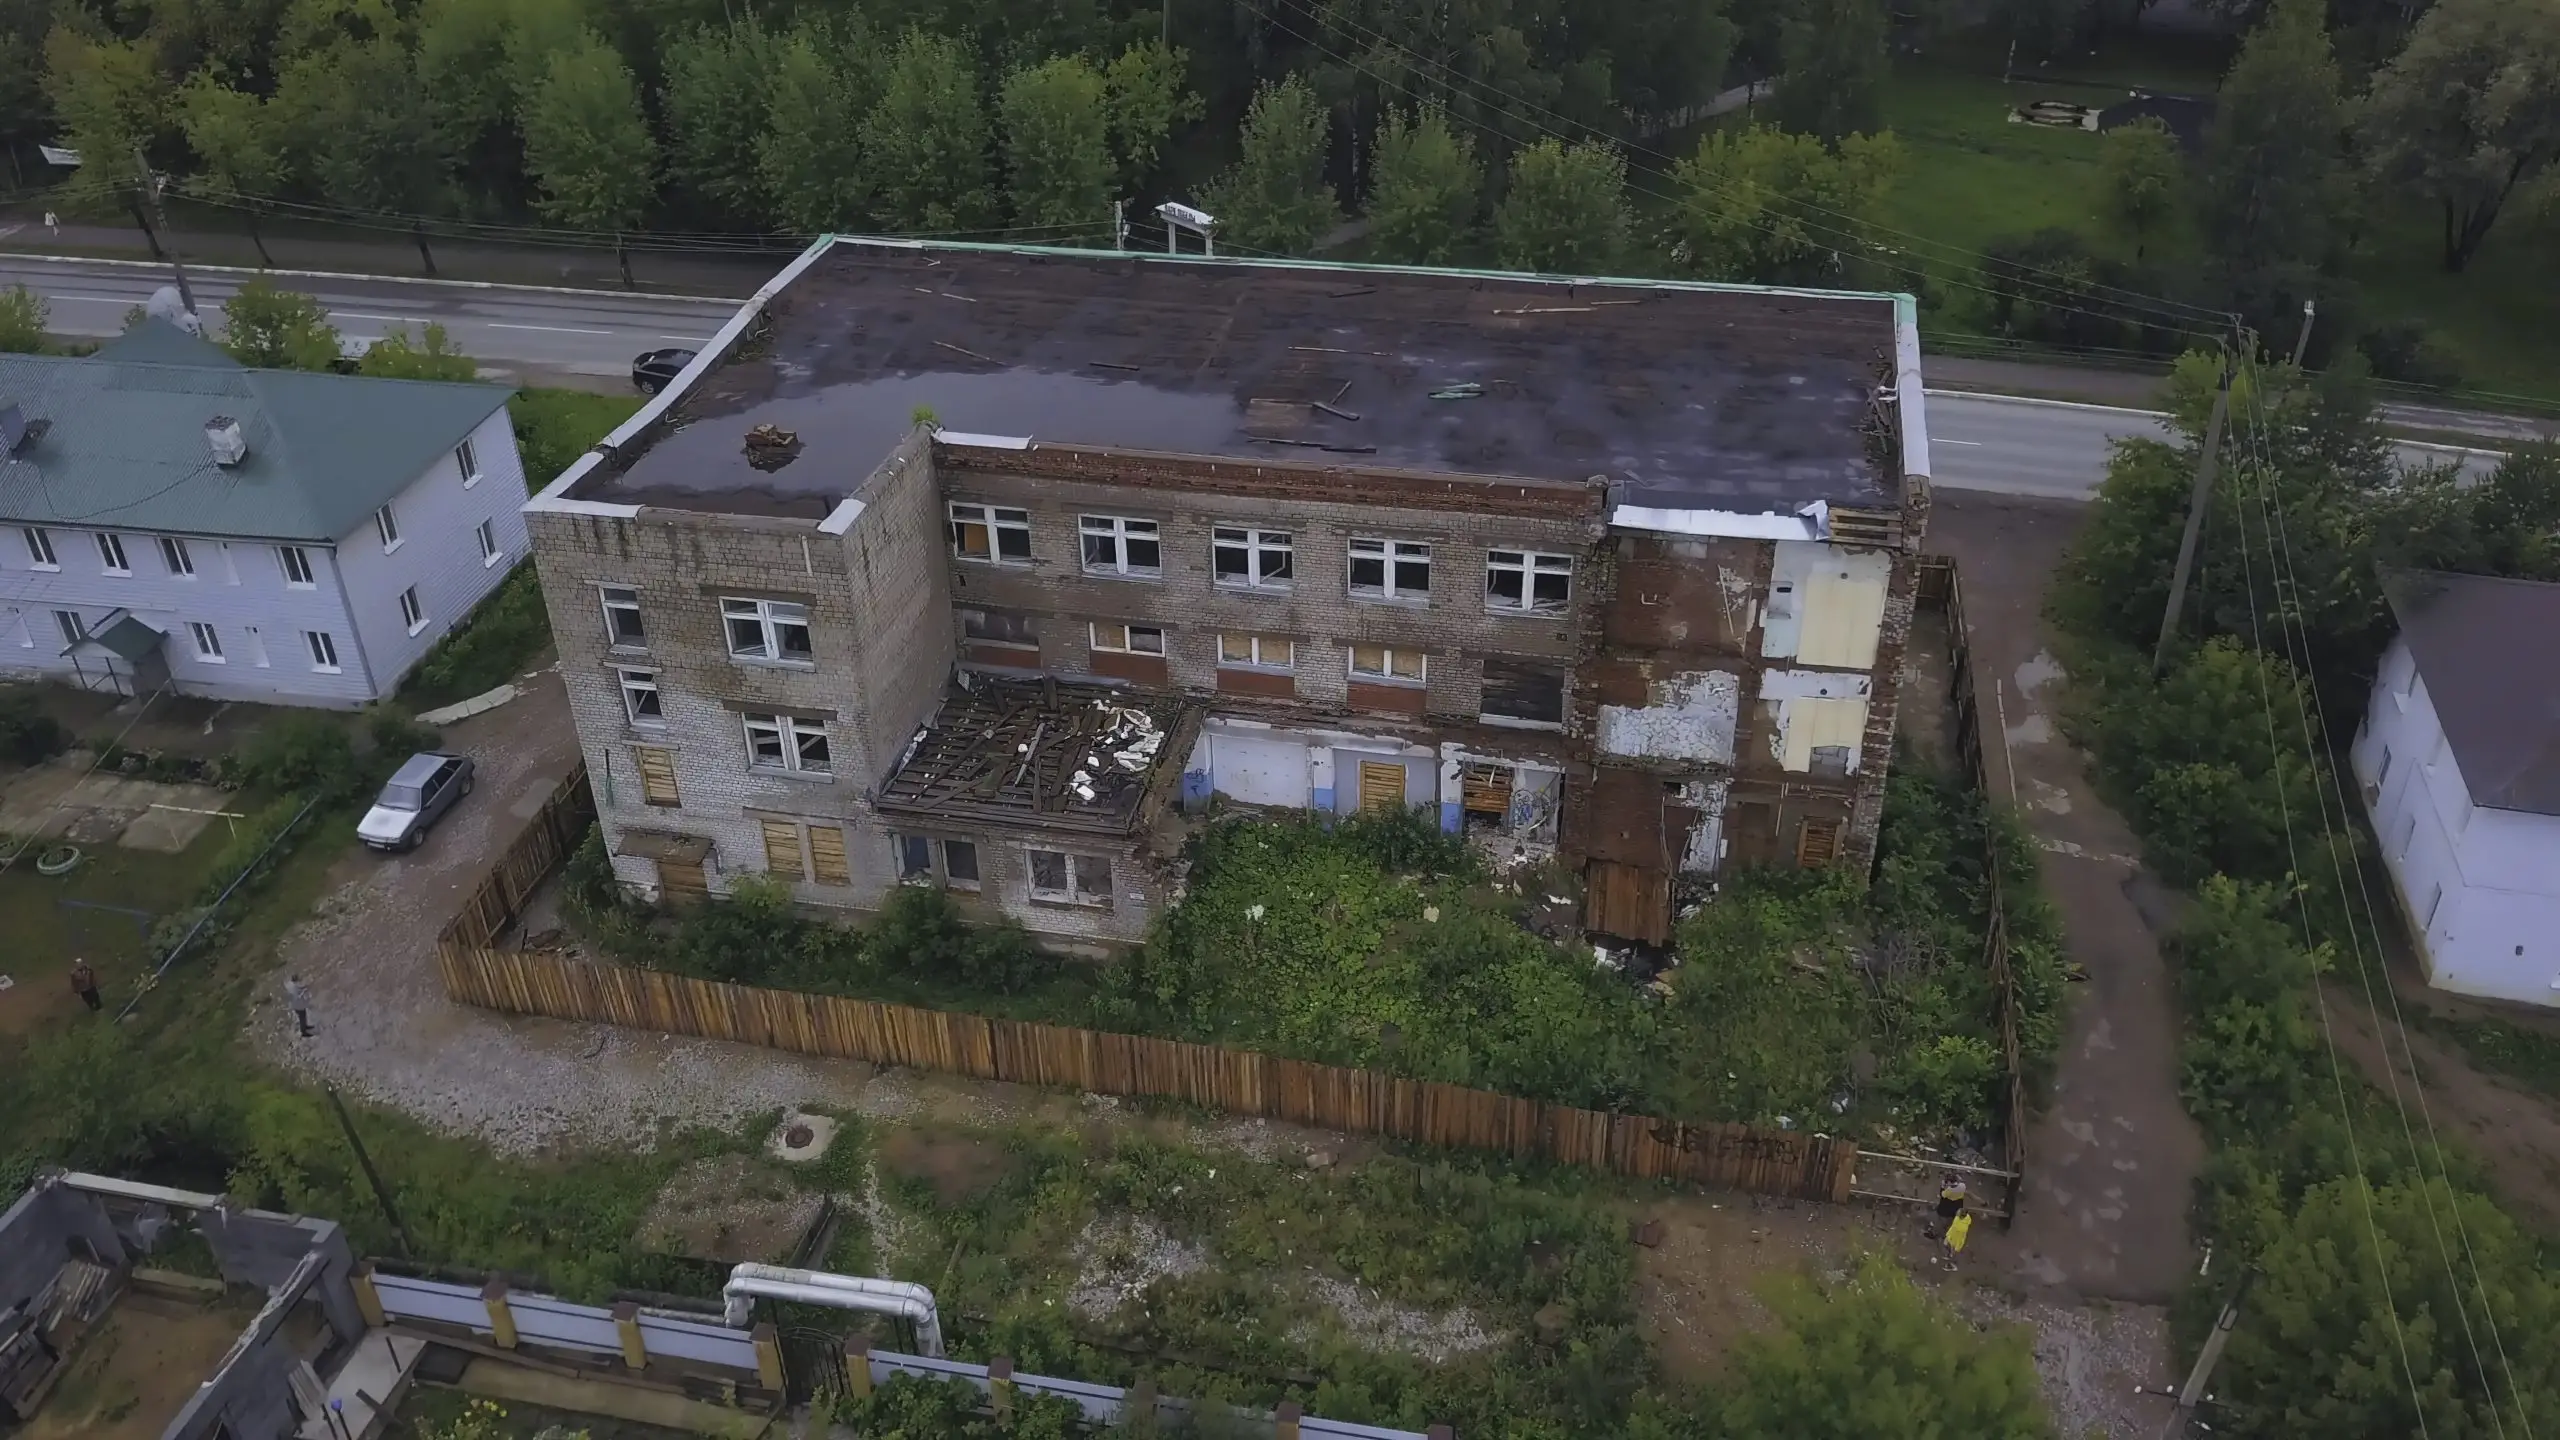 https://www.newwestern.com/wp-content/uploads/2024/01/top-view-of-abandoned-brick-building-in-residentia-2023-11-28-01-16-44-utc-scaled.jpg